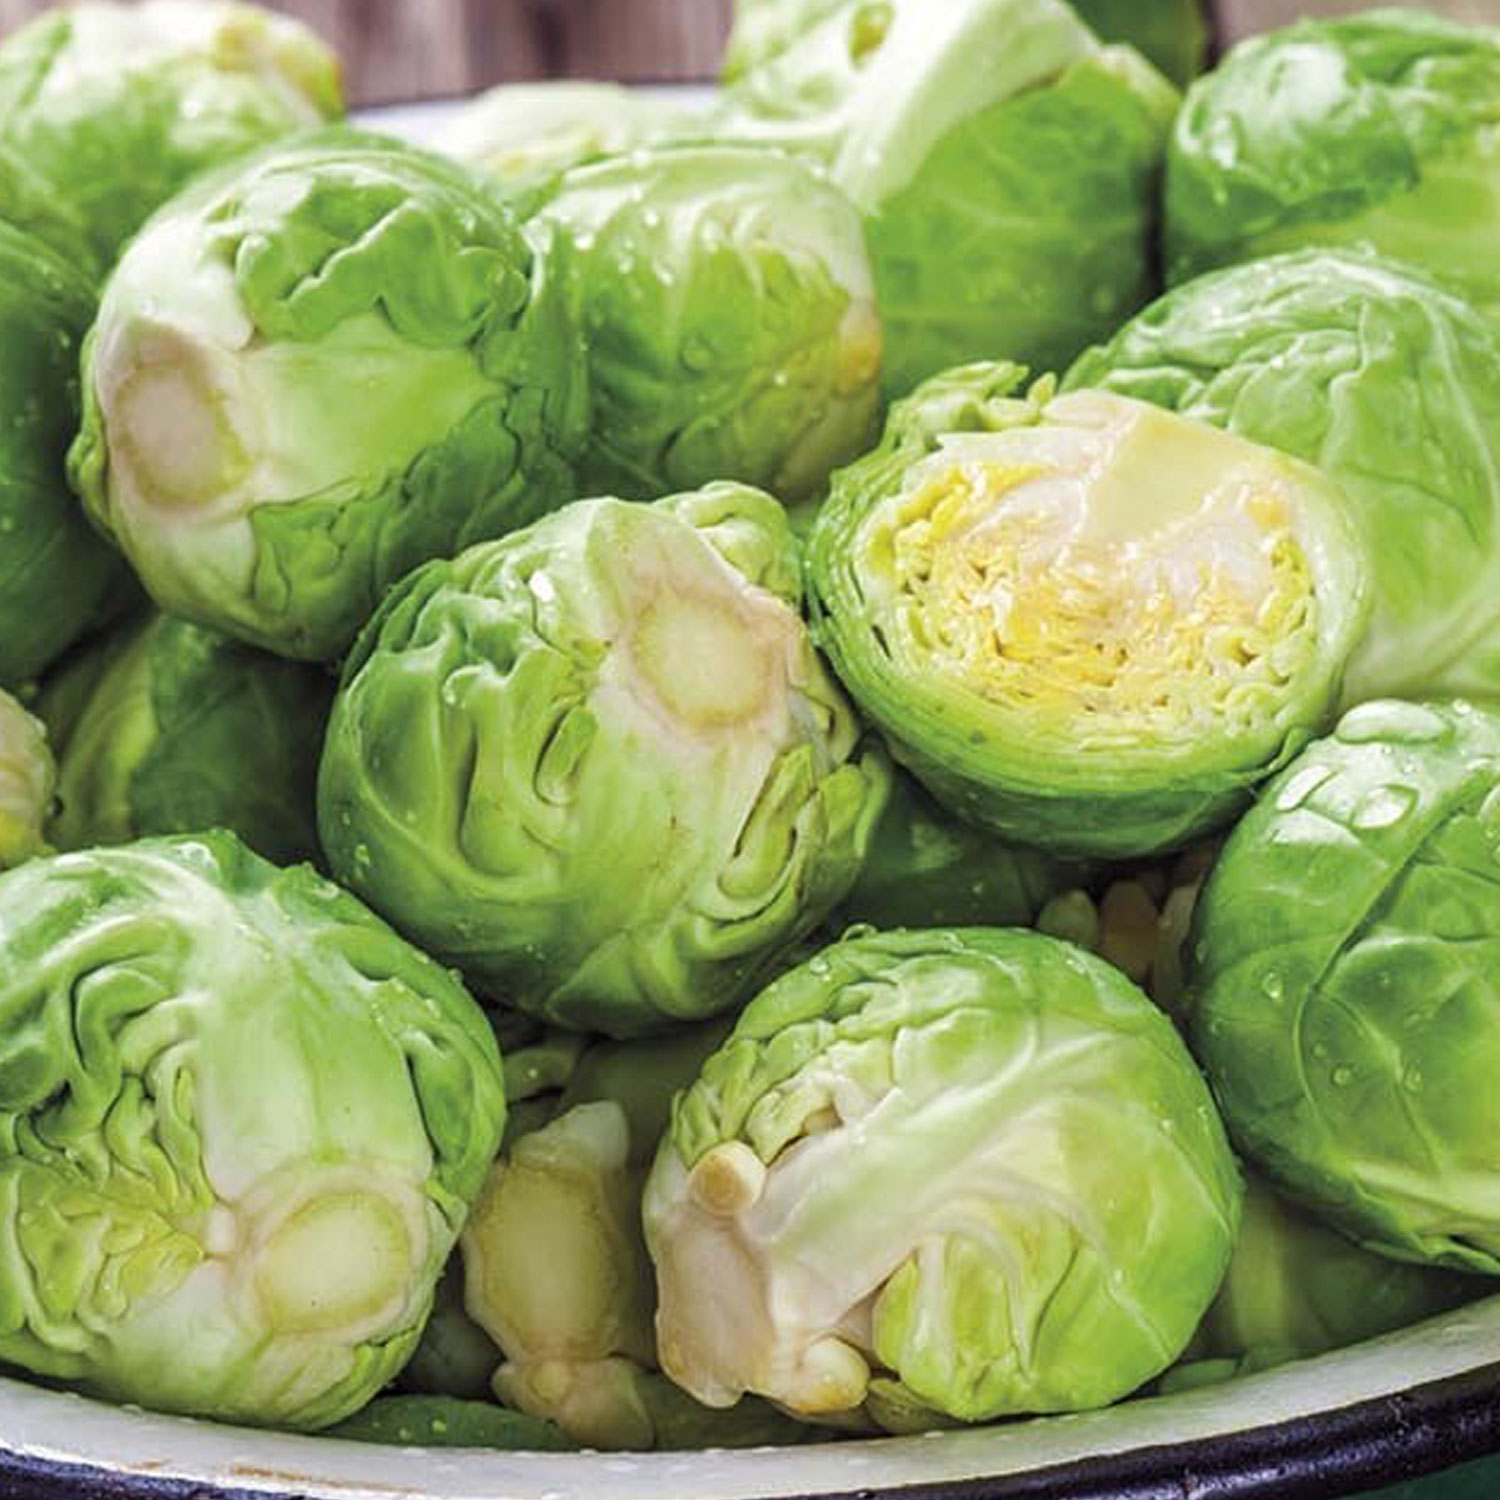 Johnsons Brussels Sprout Brechin F1 Vegetable Seeds Image 1